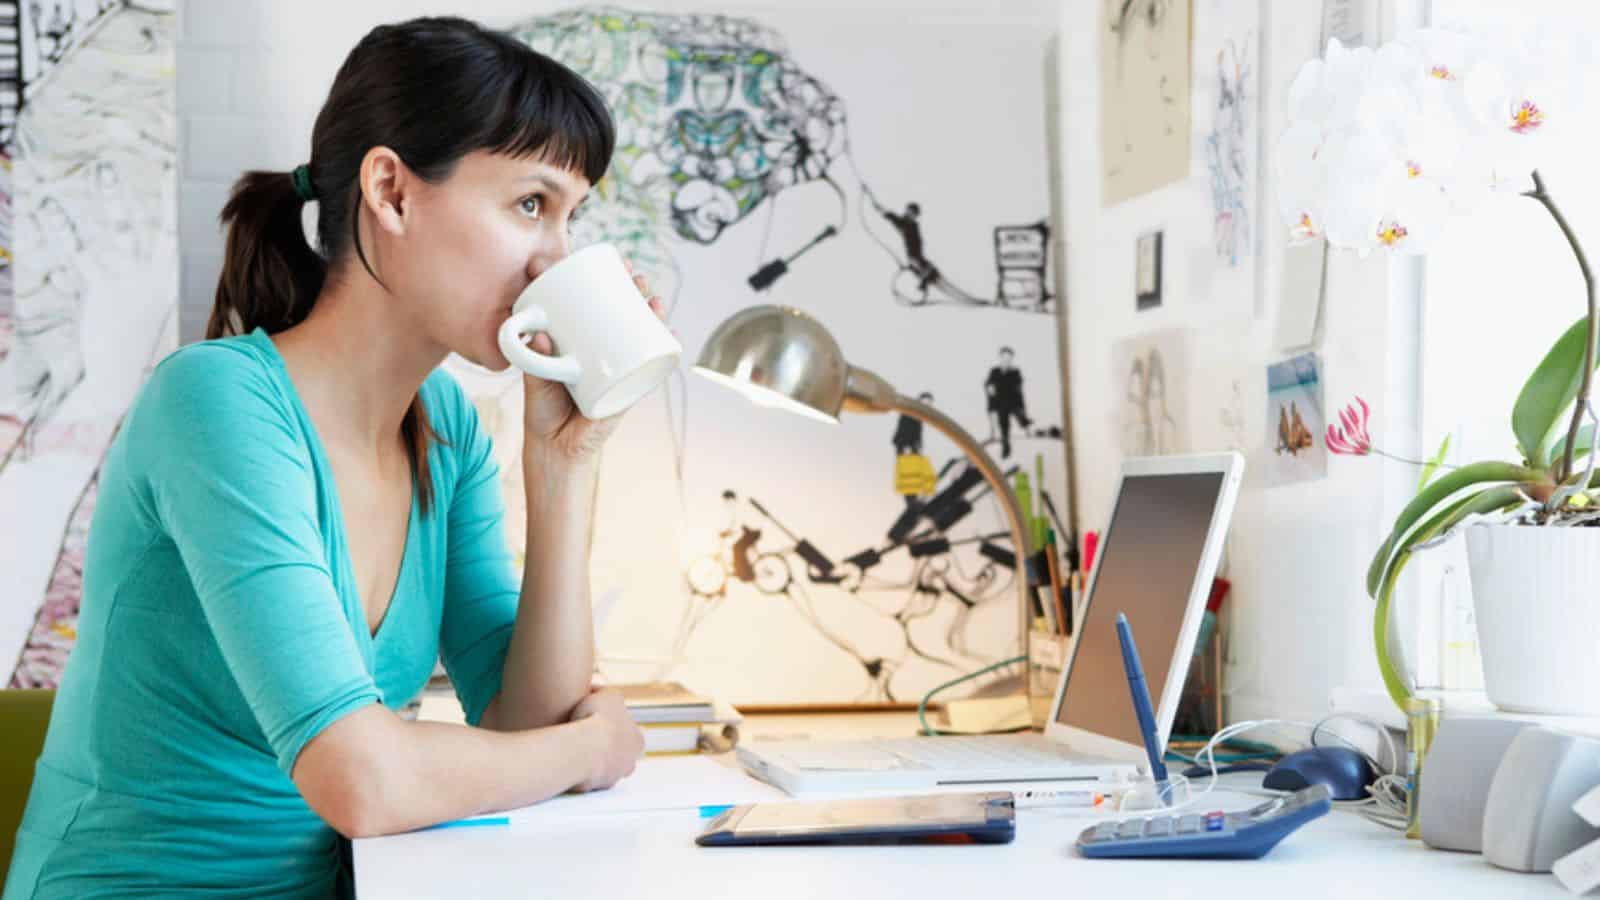 Woman working at a desk while drinking coffee.jpg